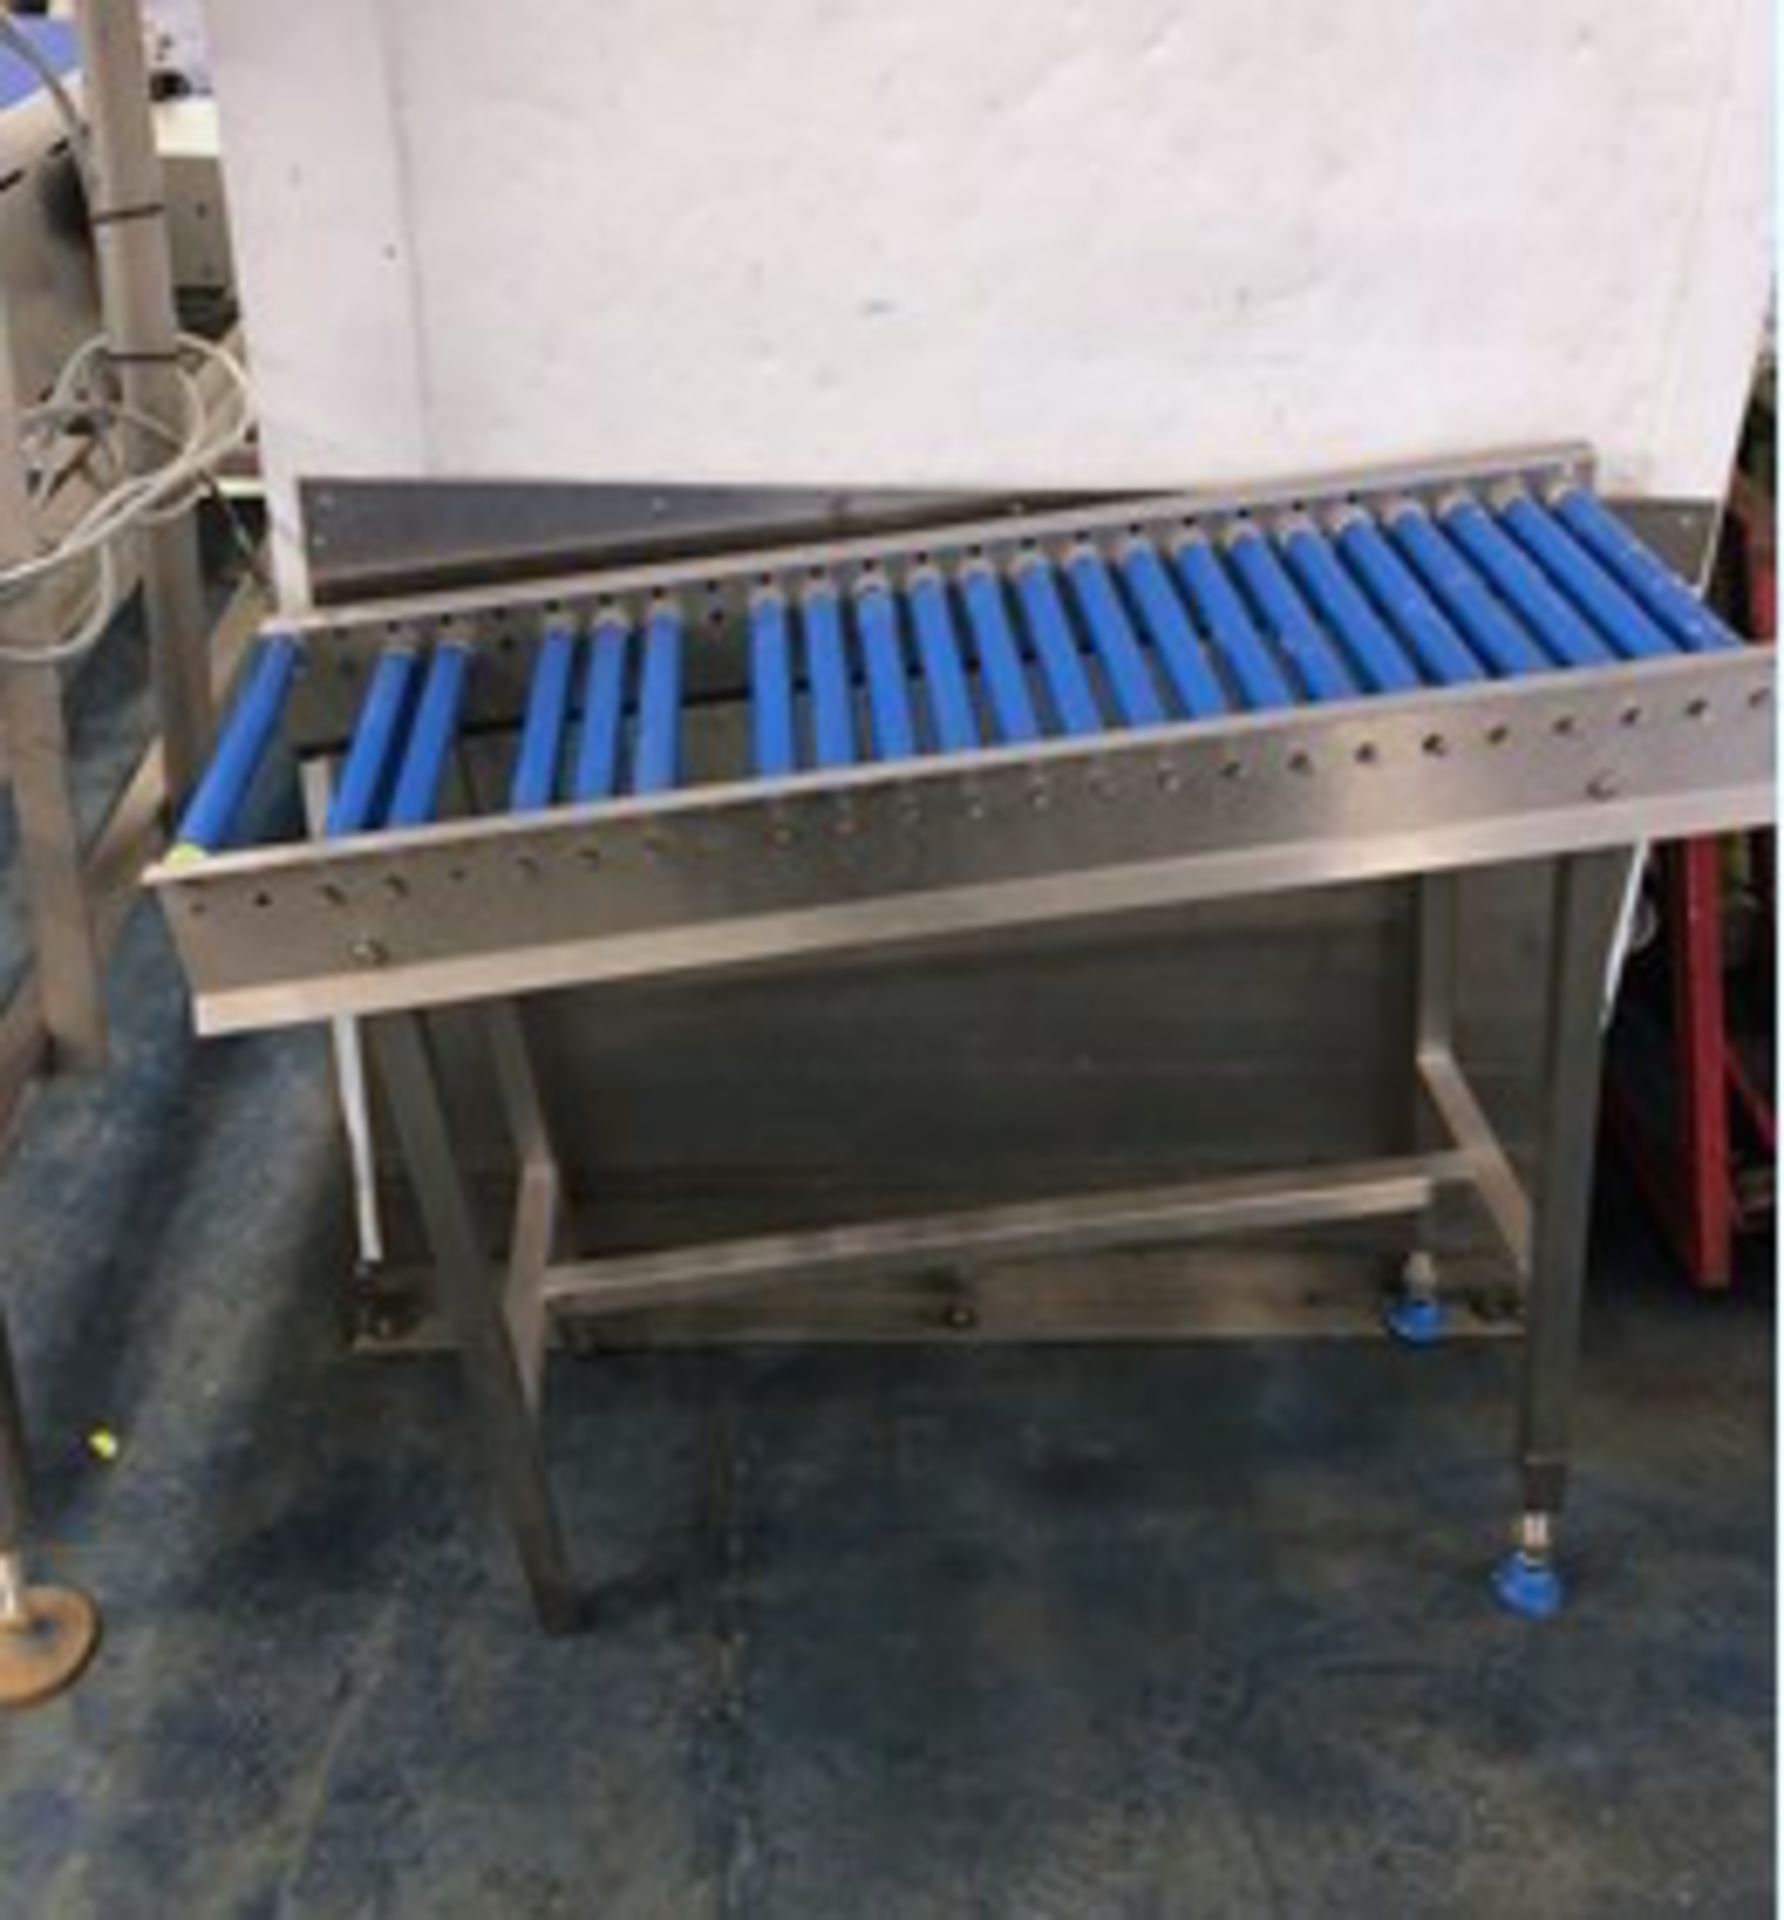 Roller Conveyors: 1 x 3500 x 320 wide; 2 x 2300 x 550mm wide; 1 x 1000 x300mm wide. LO £30 - Image 3 of 3